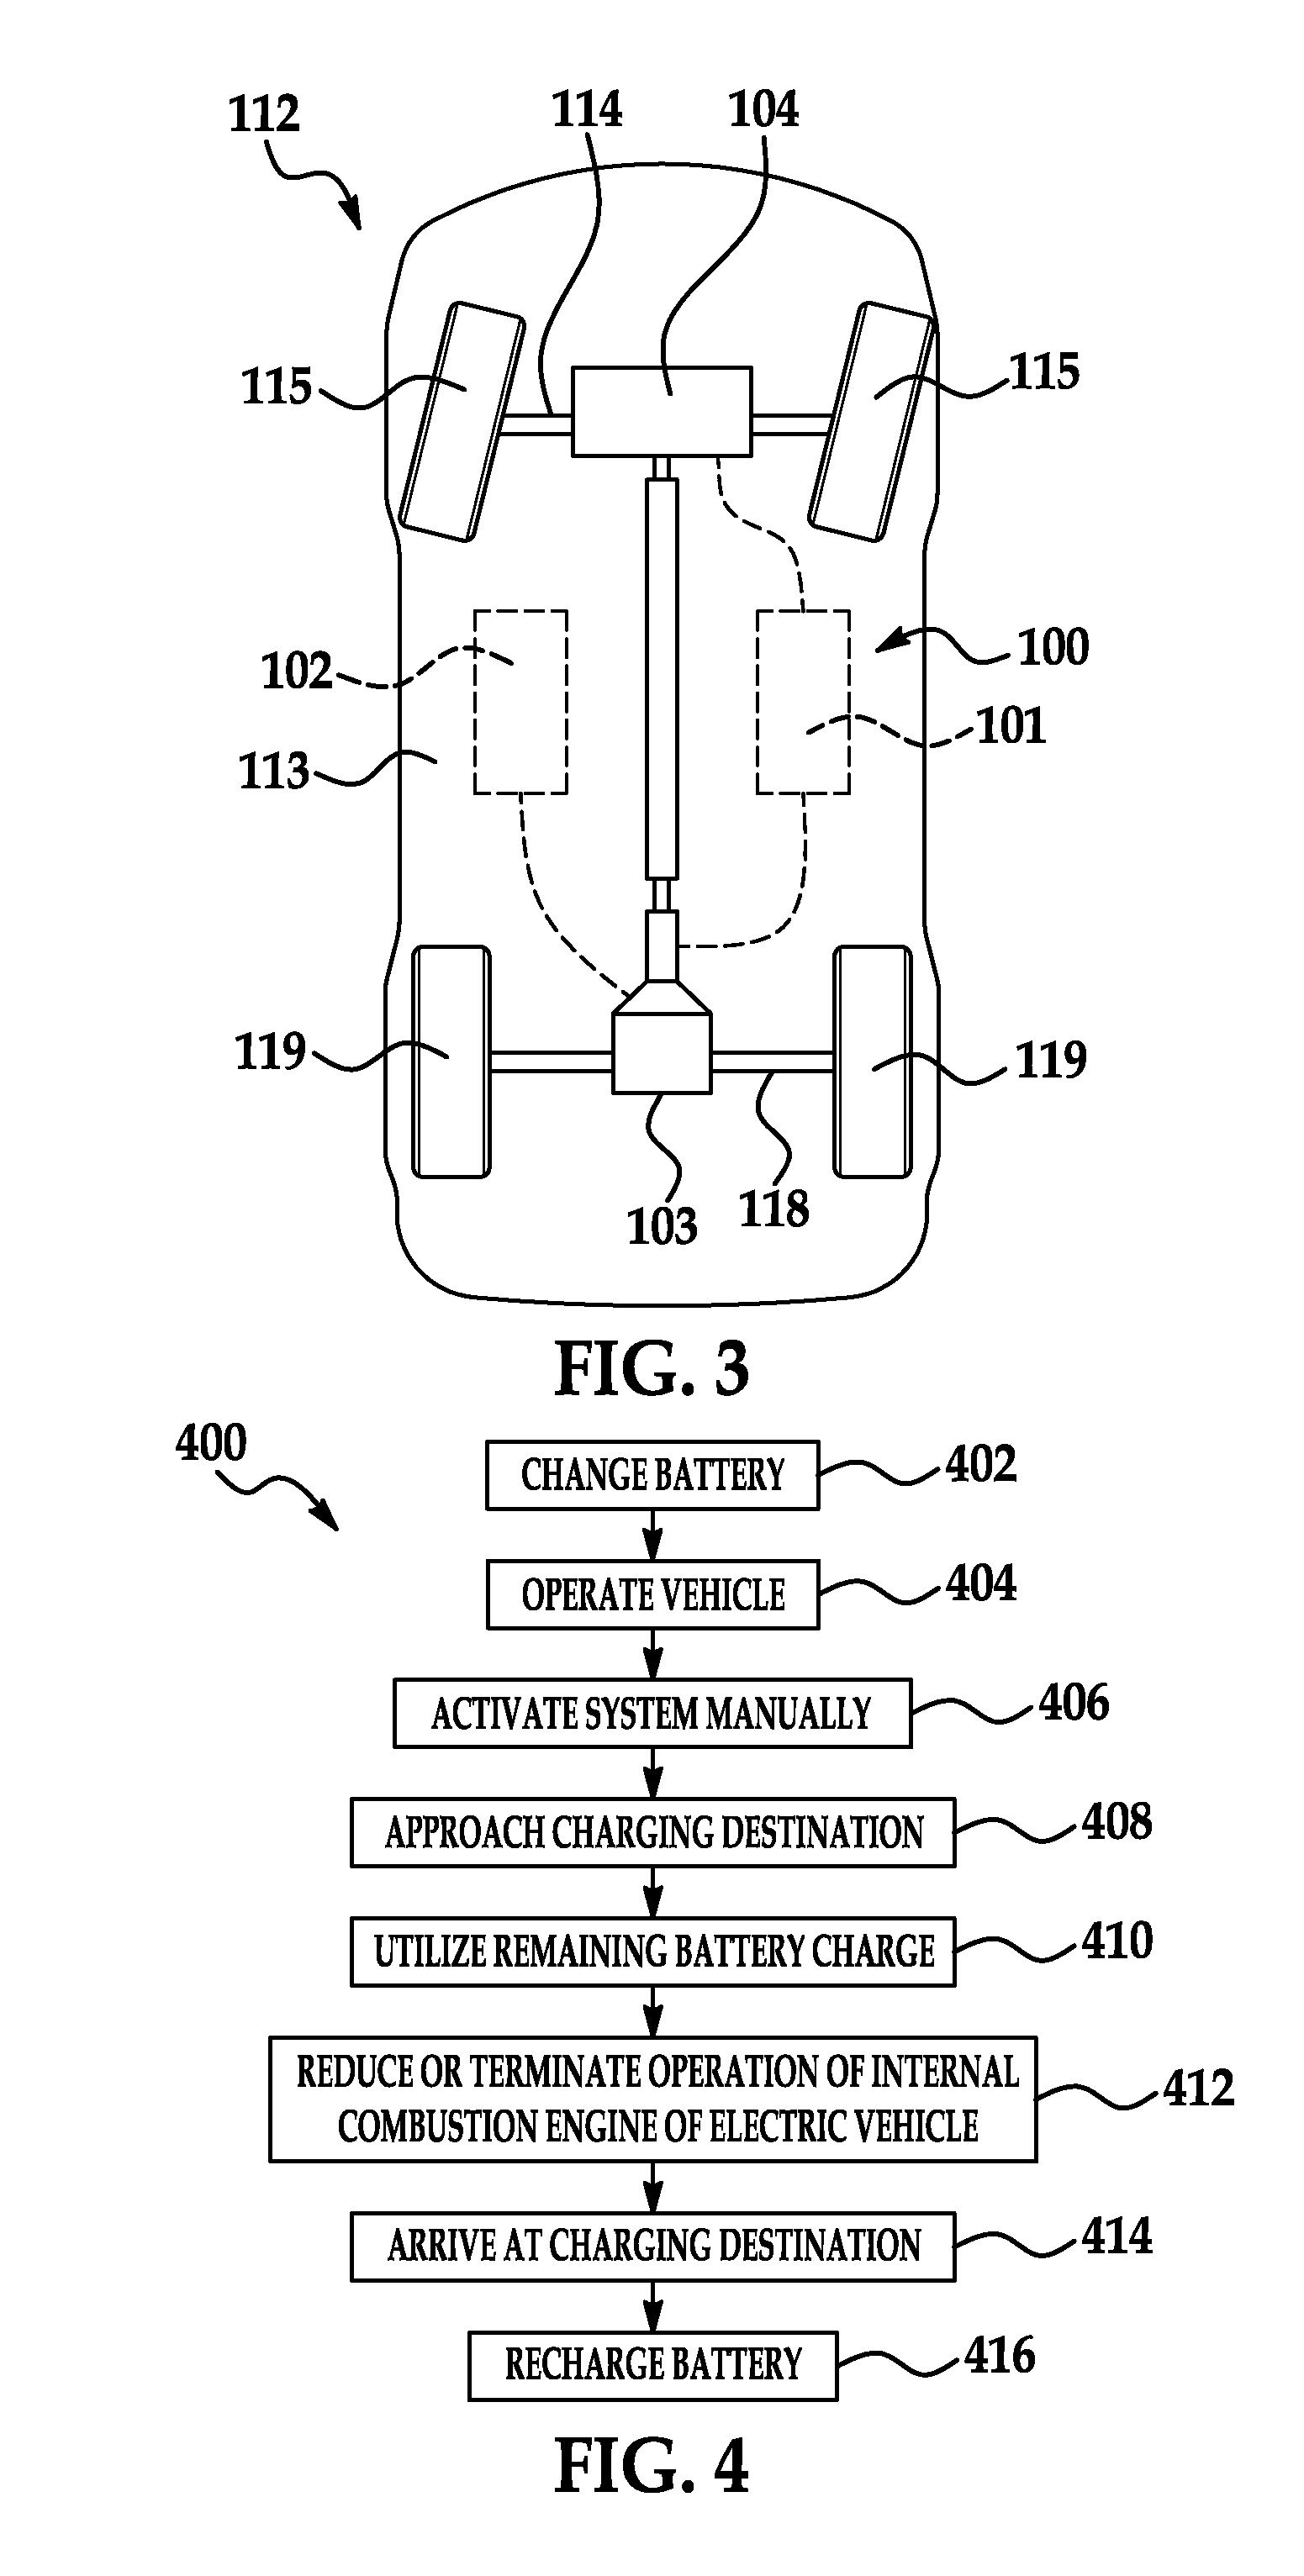 Charge utilization control system and method